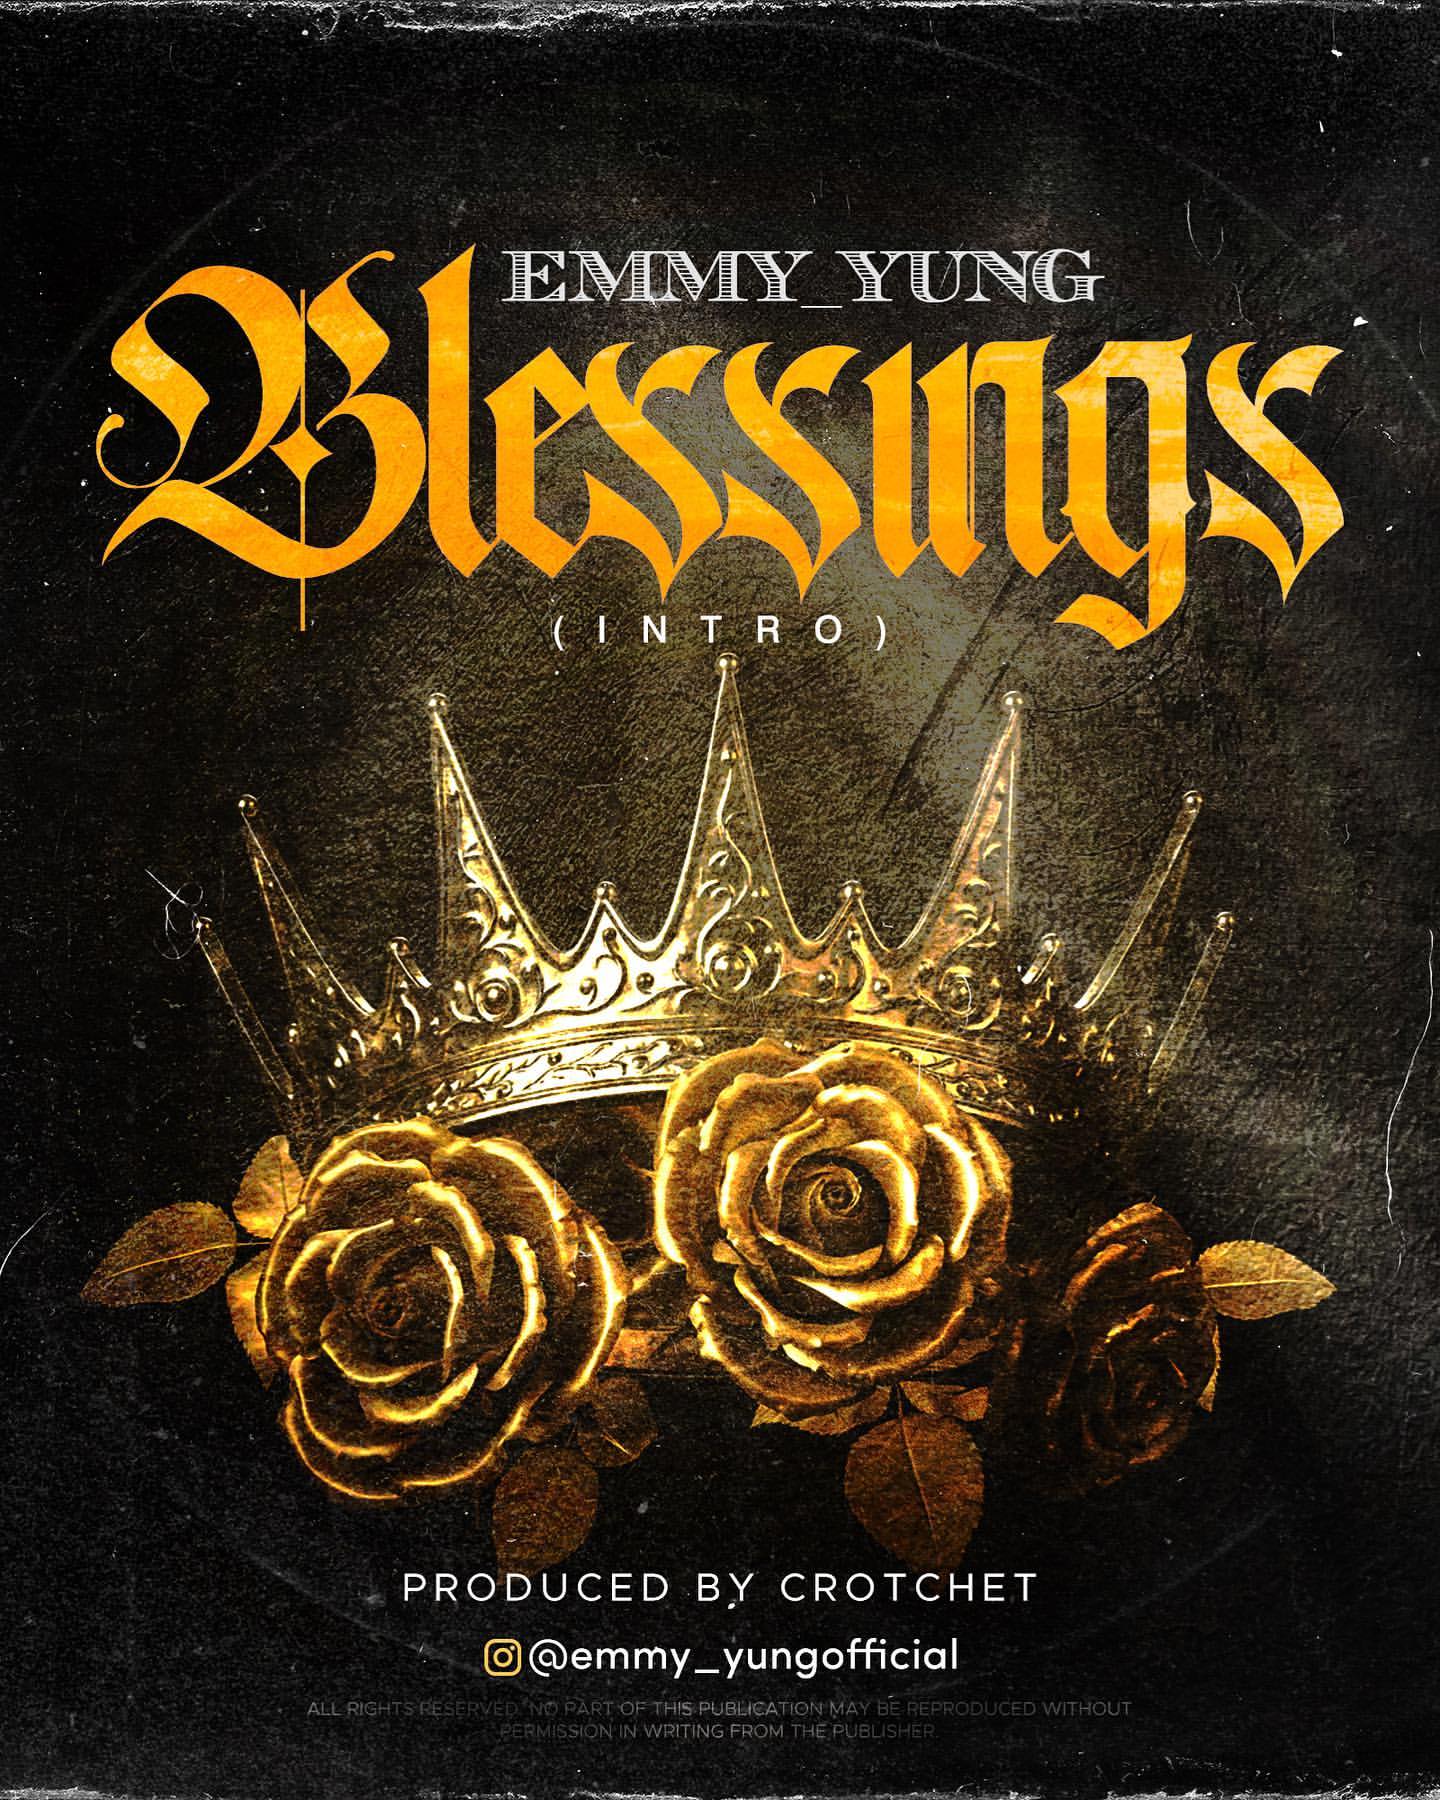 Emmy Yung – Blessings